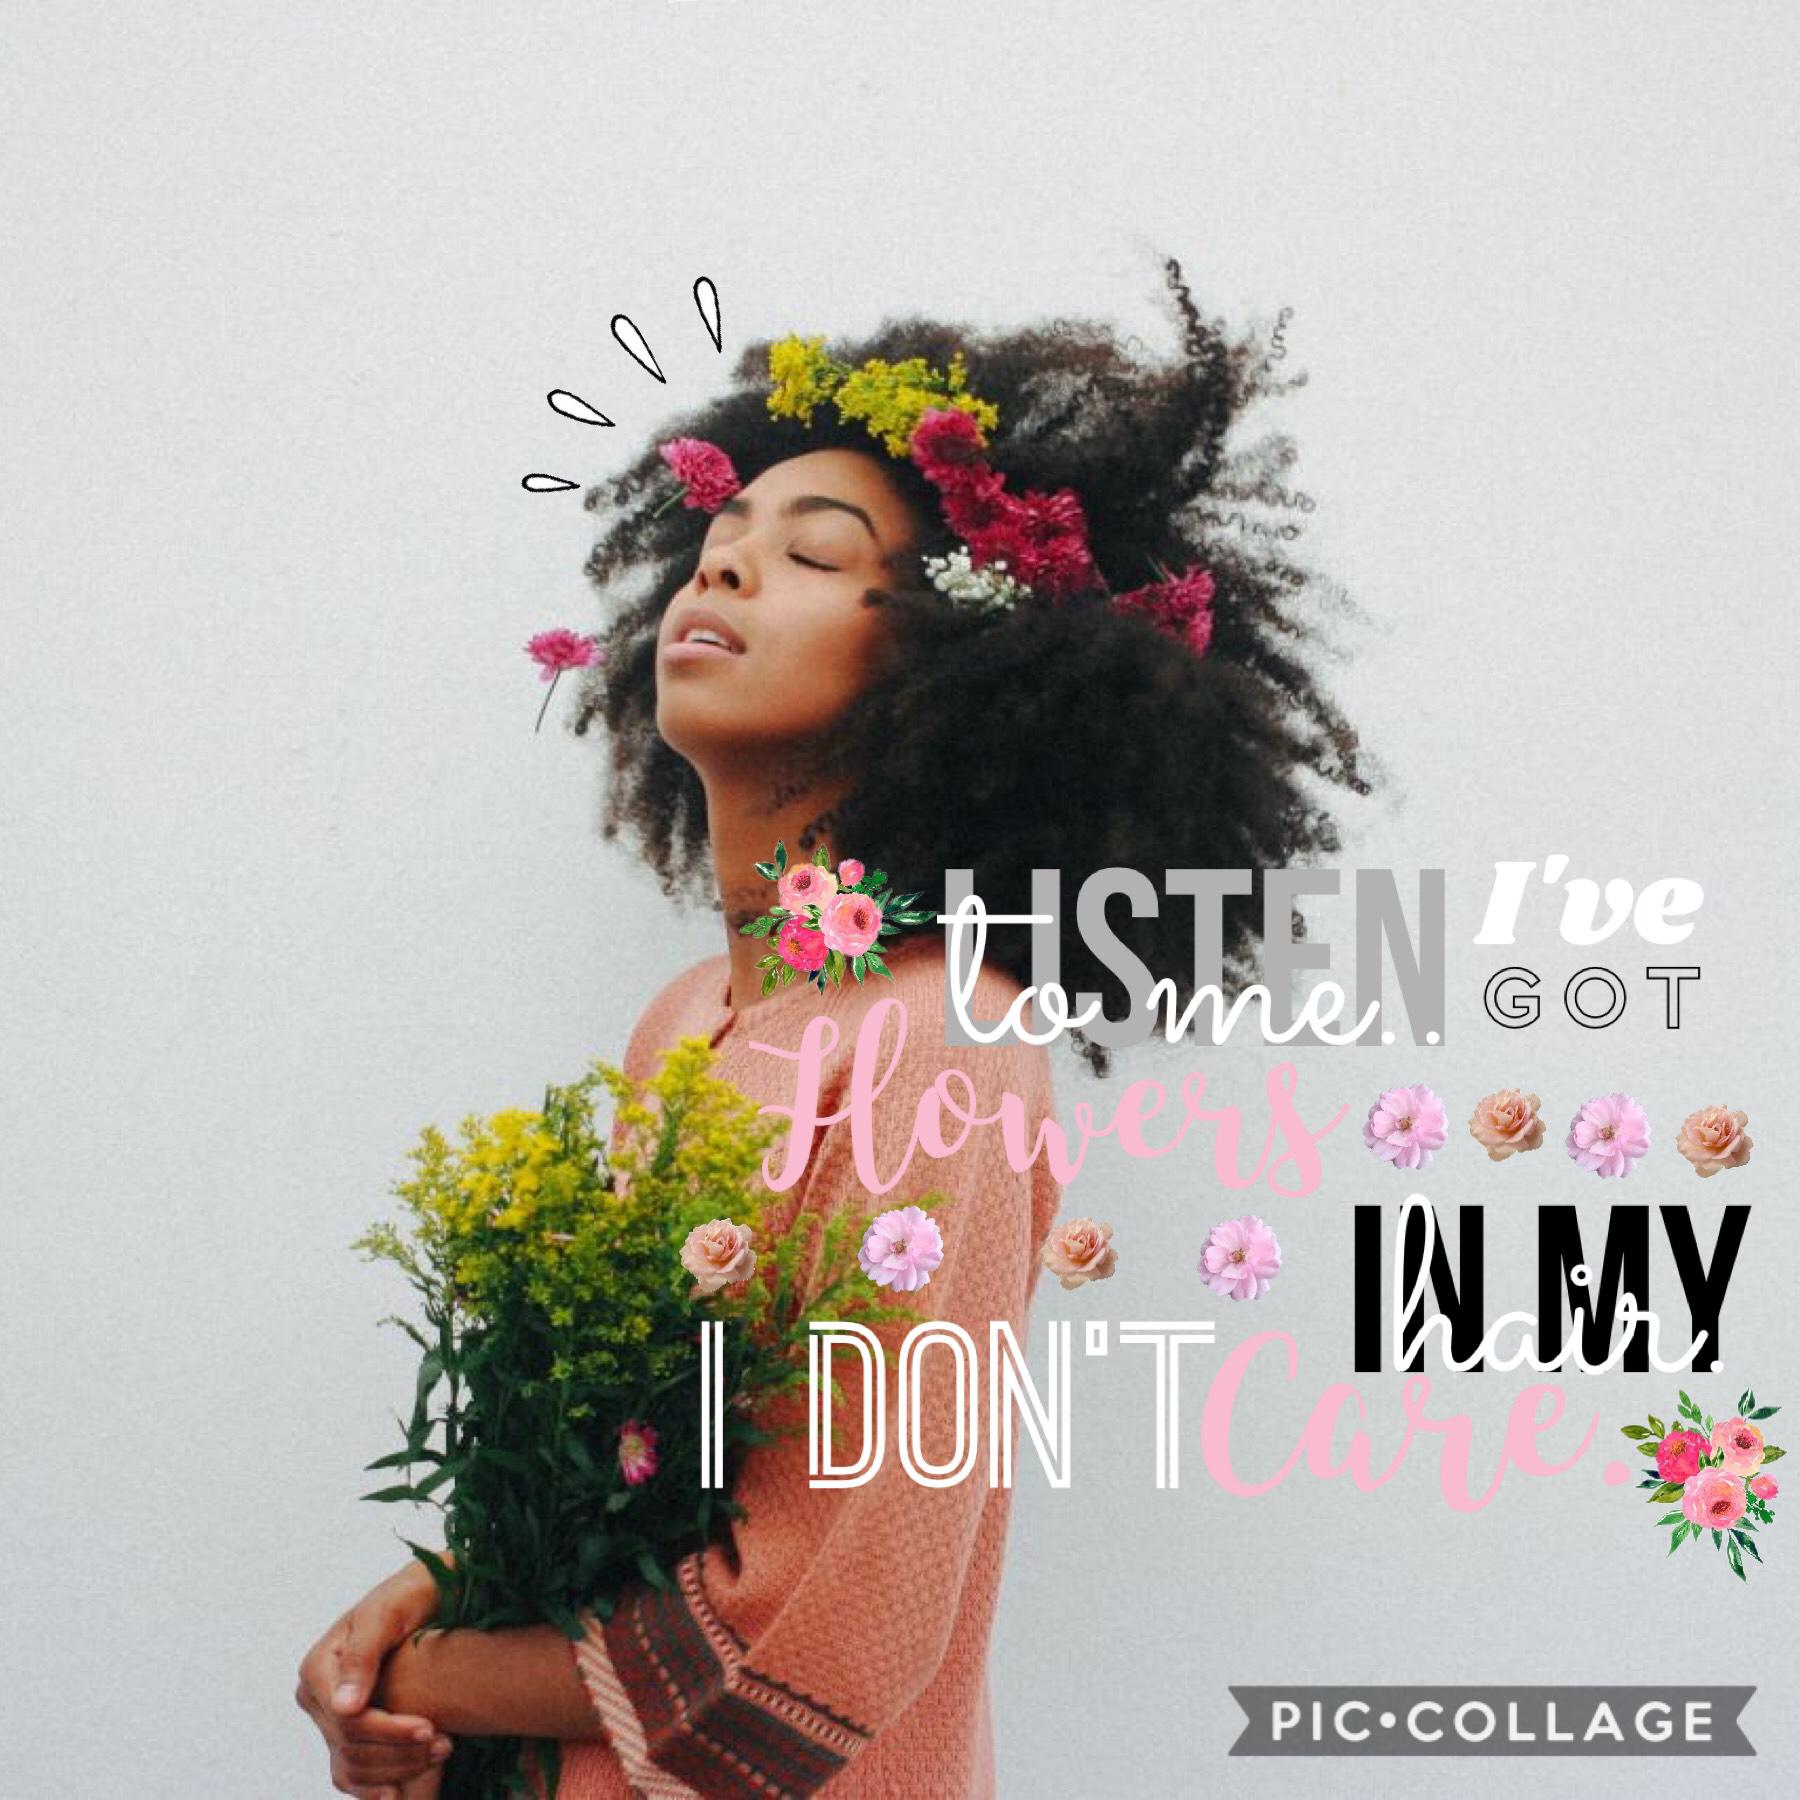 Flowers in my hair, I DON'T CARE!!!